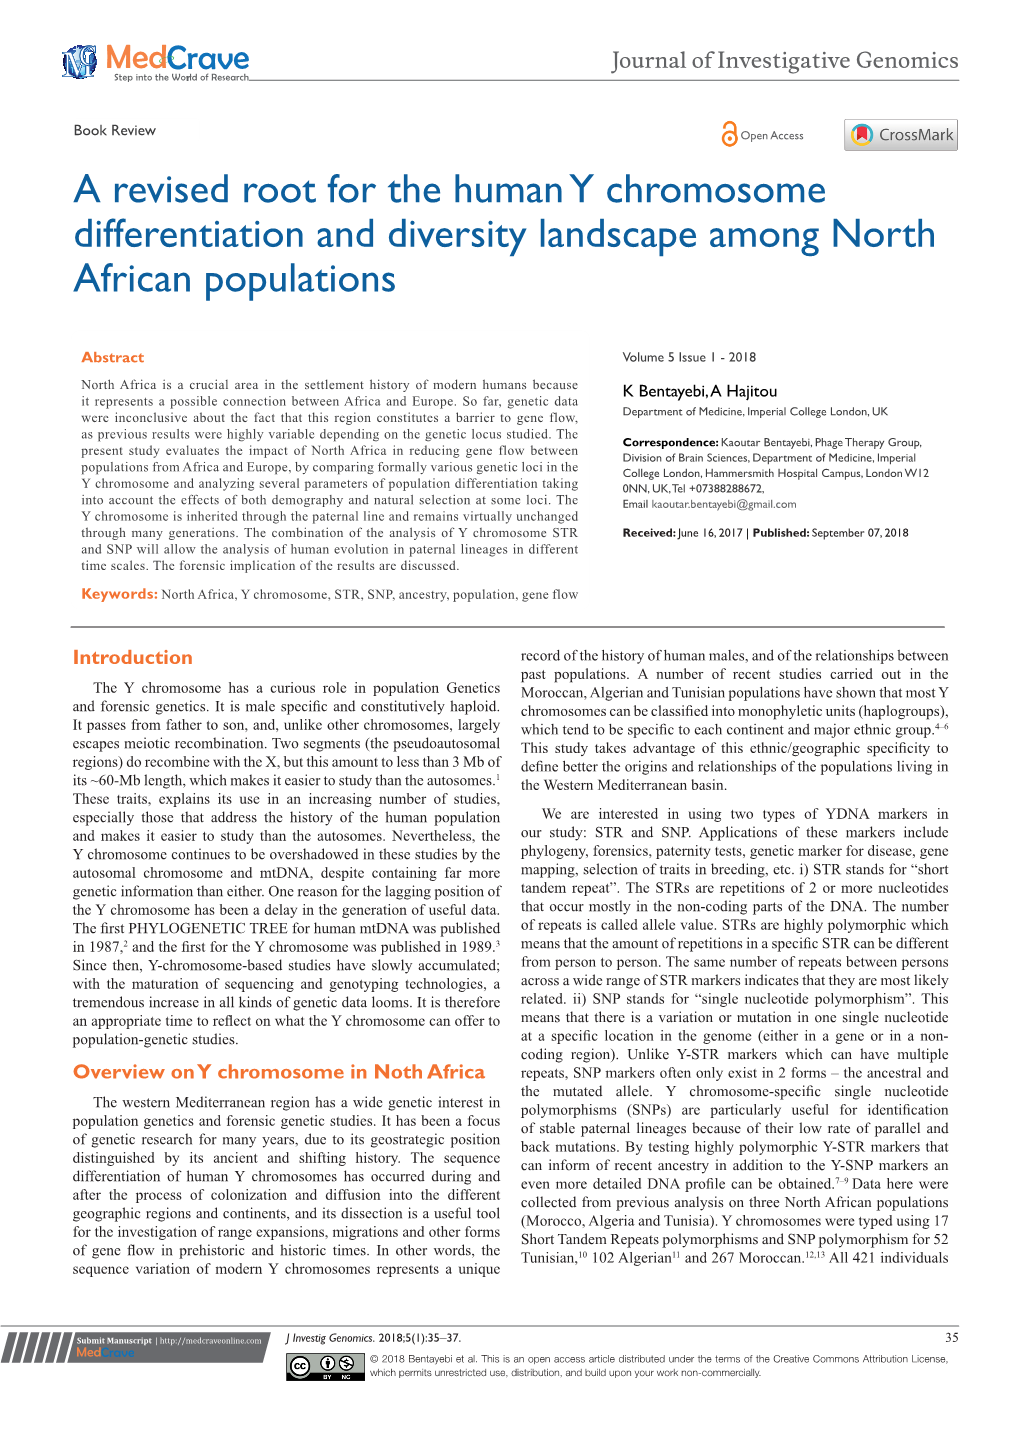 A Revised Root for the Human Y Chromosome Differentiation and Diversity Landscape Among North African Populations